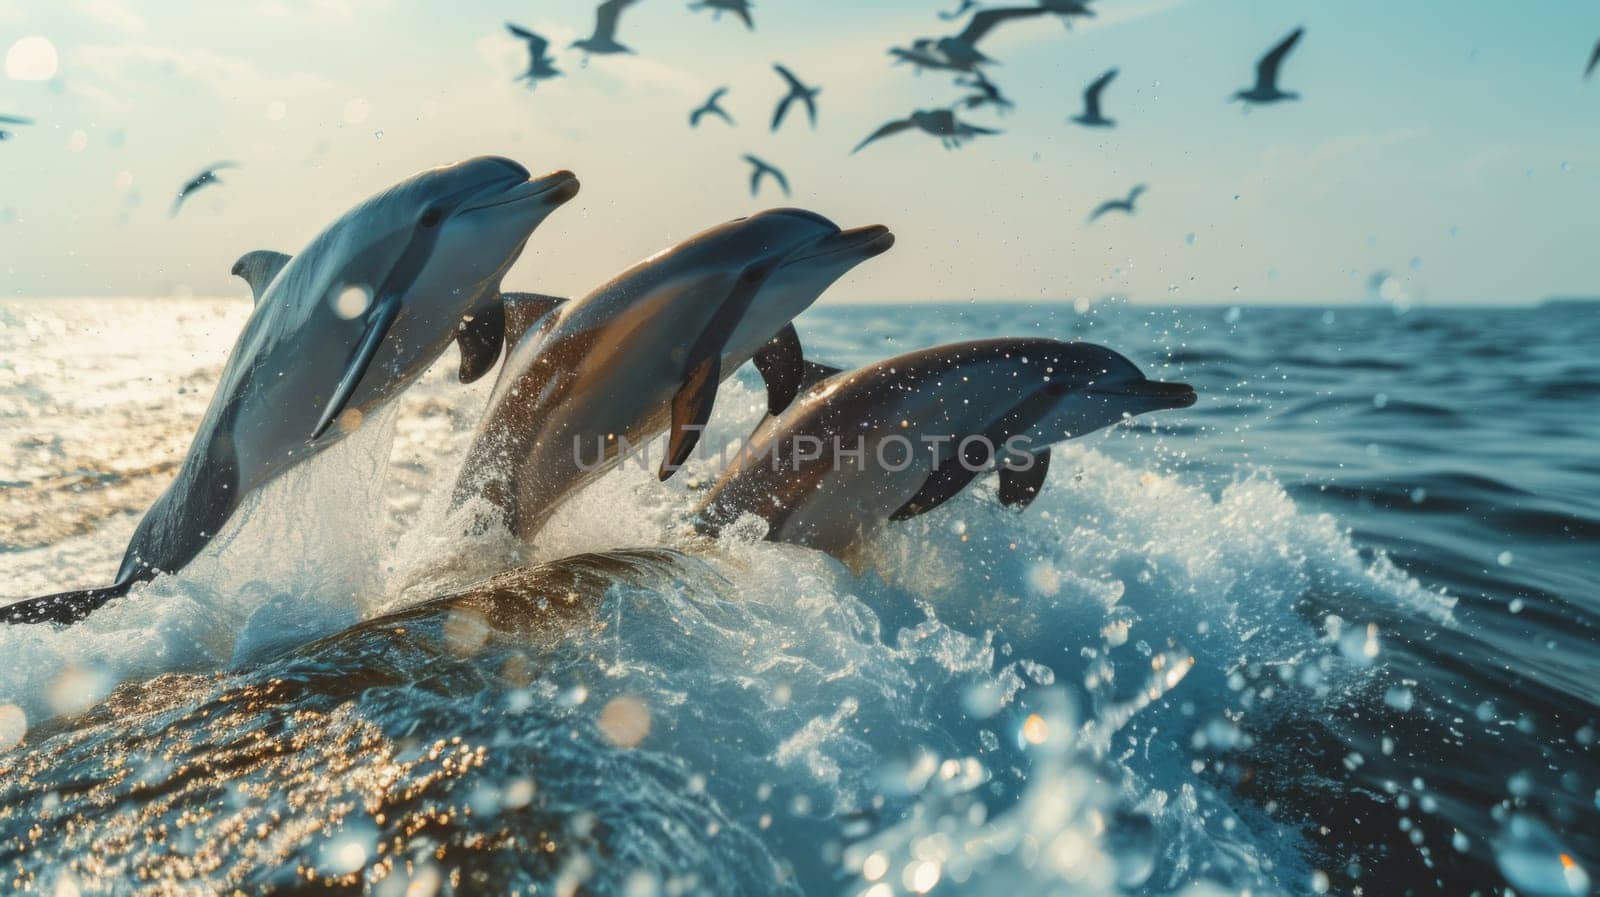 A group of dolphins jumping out of the water in front of birds